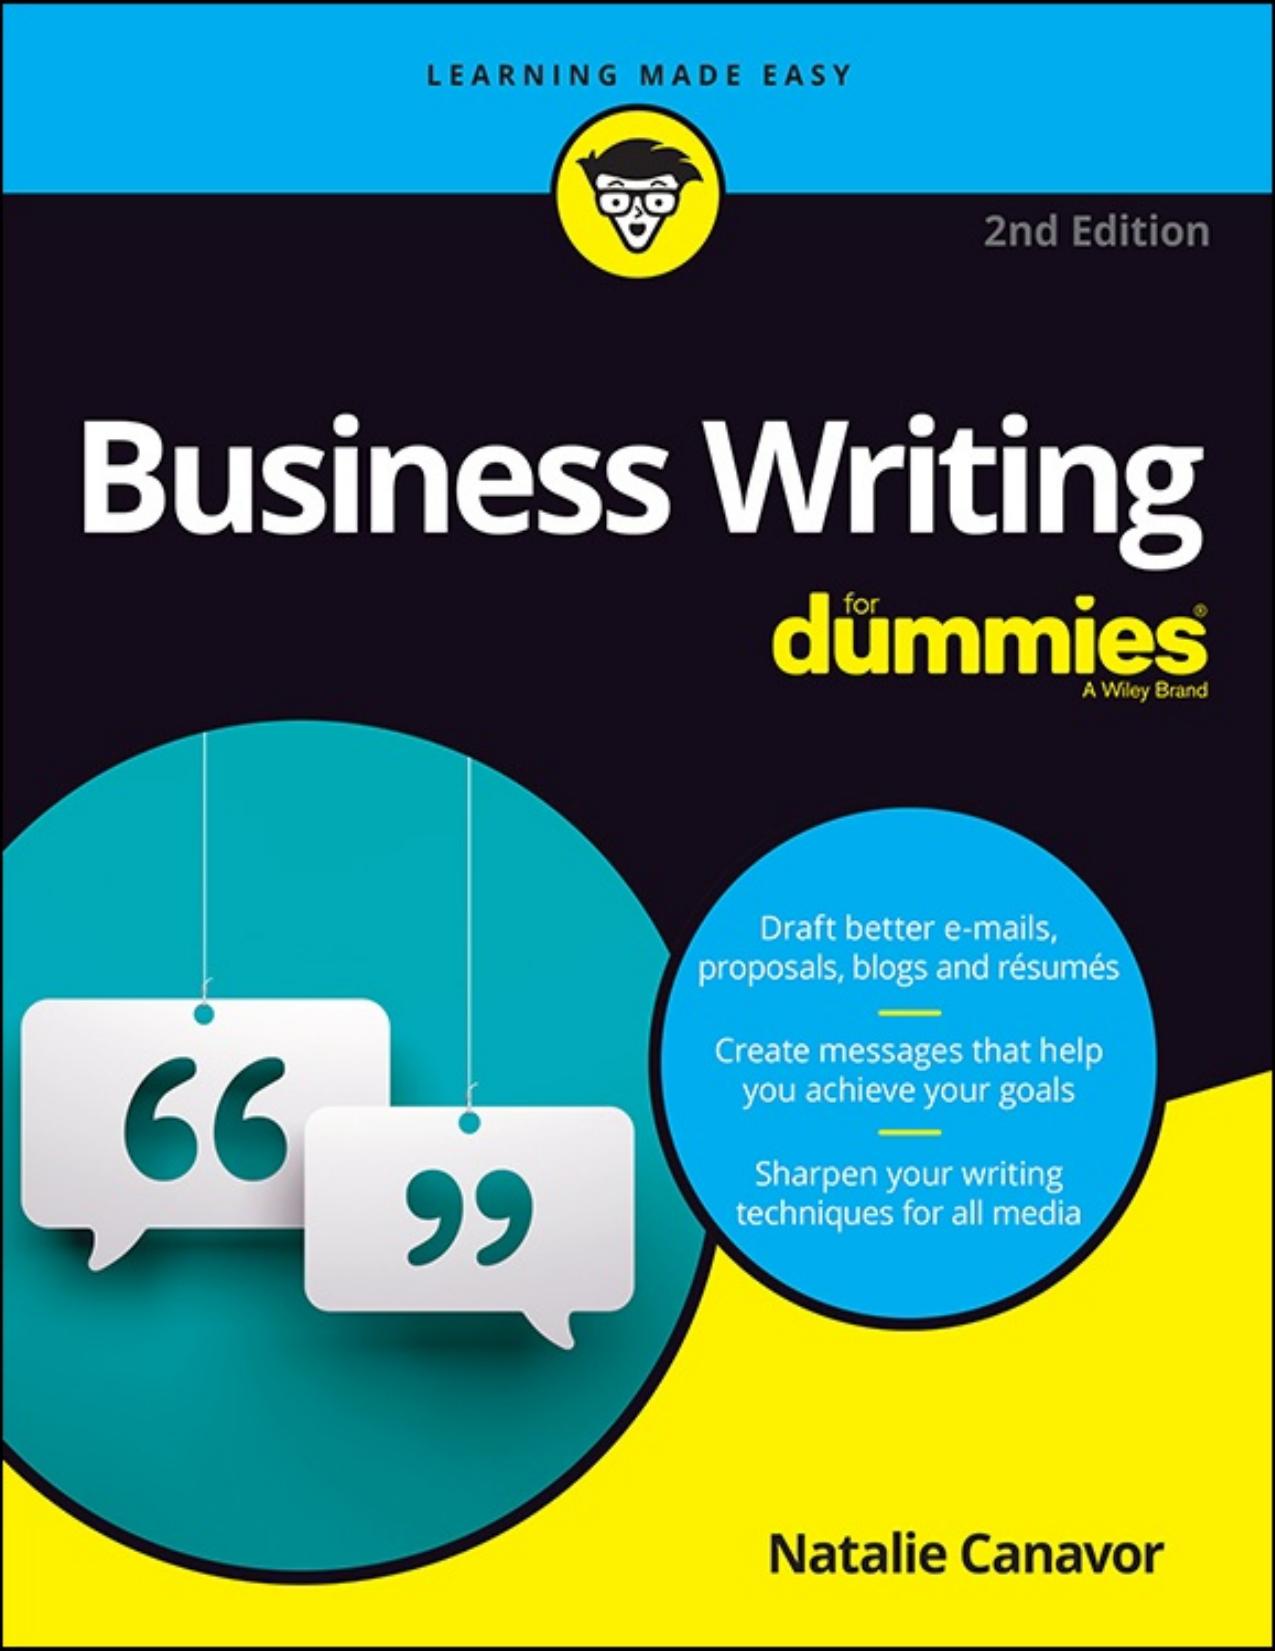 Business Writing For Dummies - PDFDrive.com